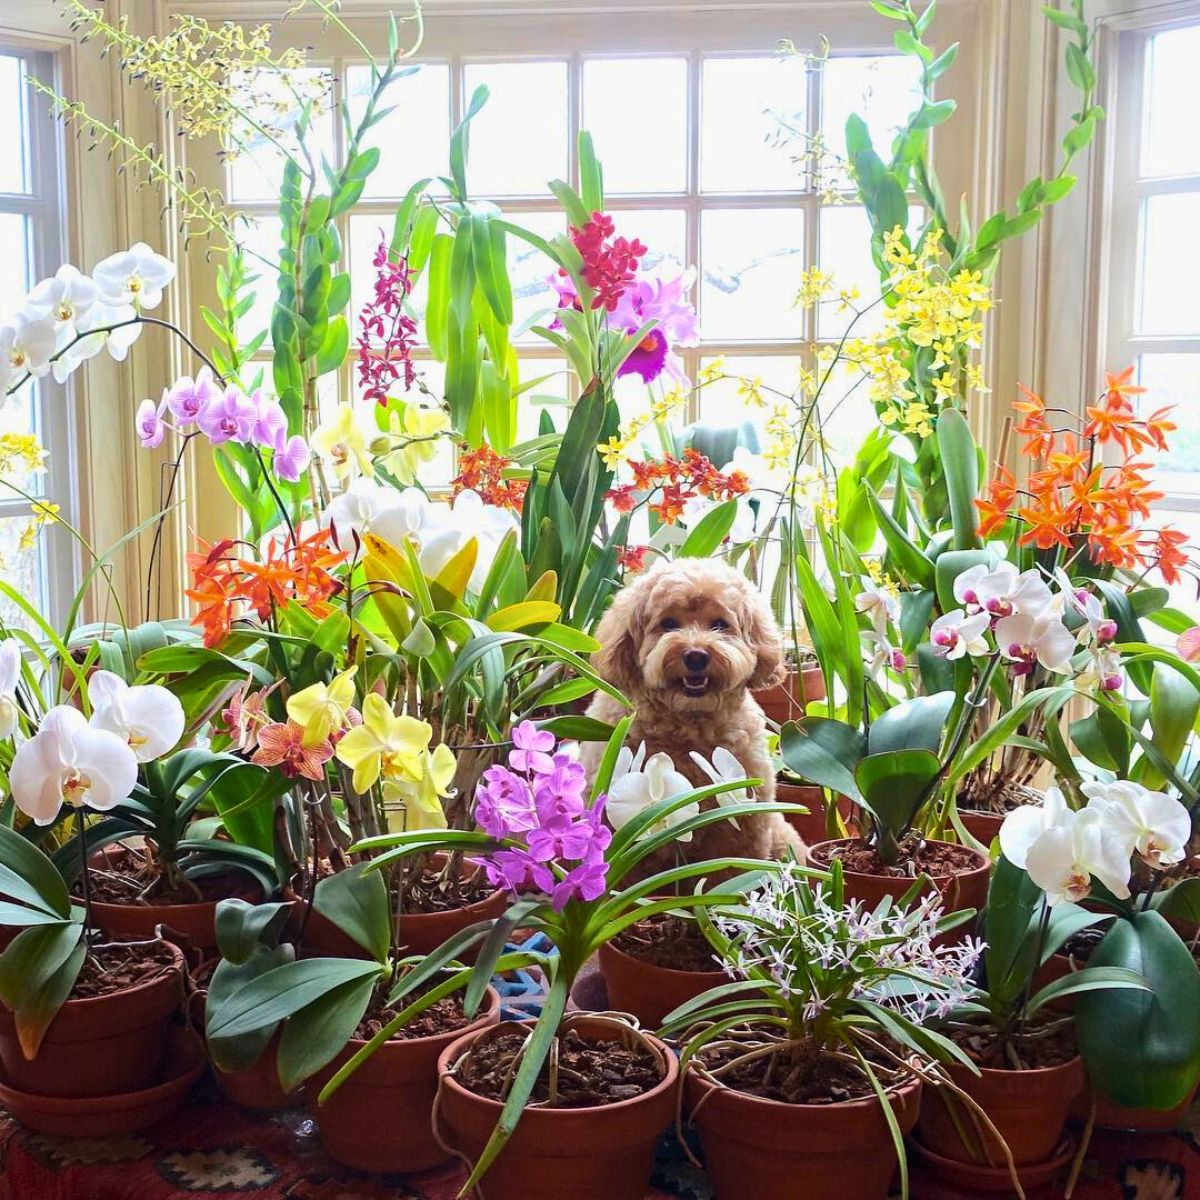 Doggy posing with orchids